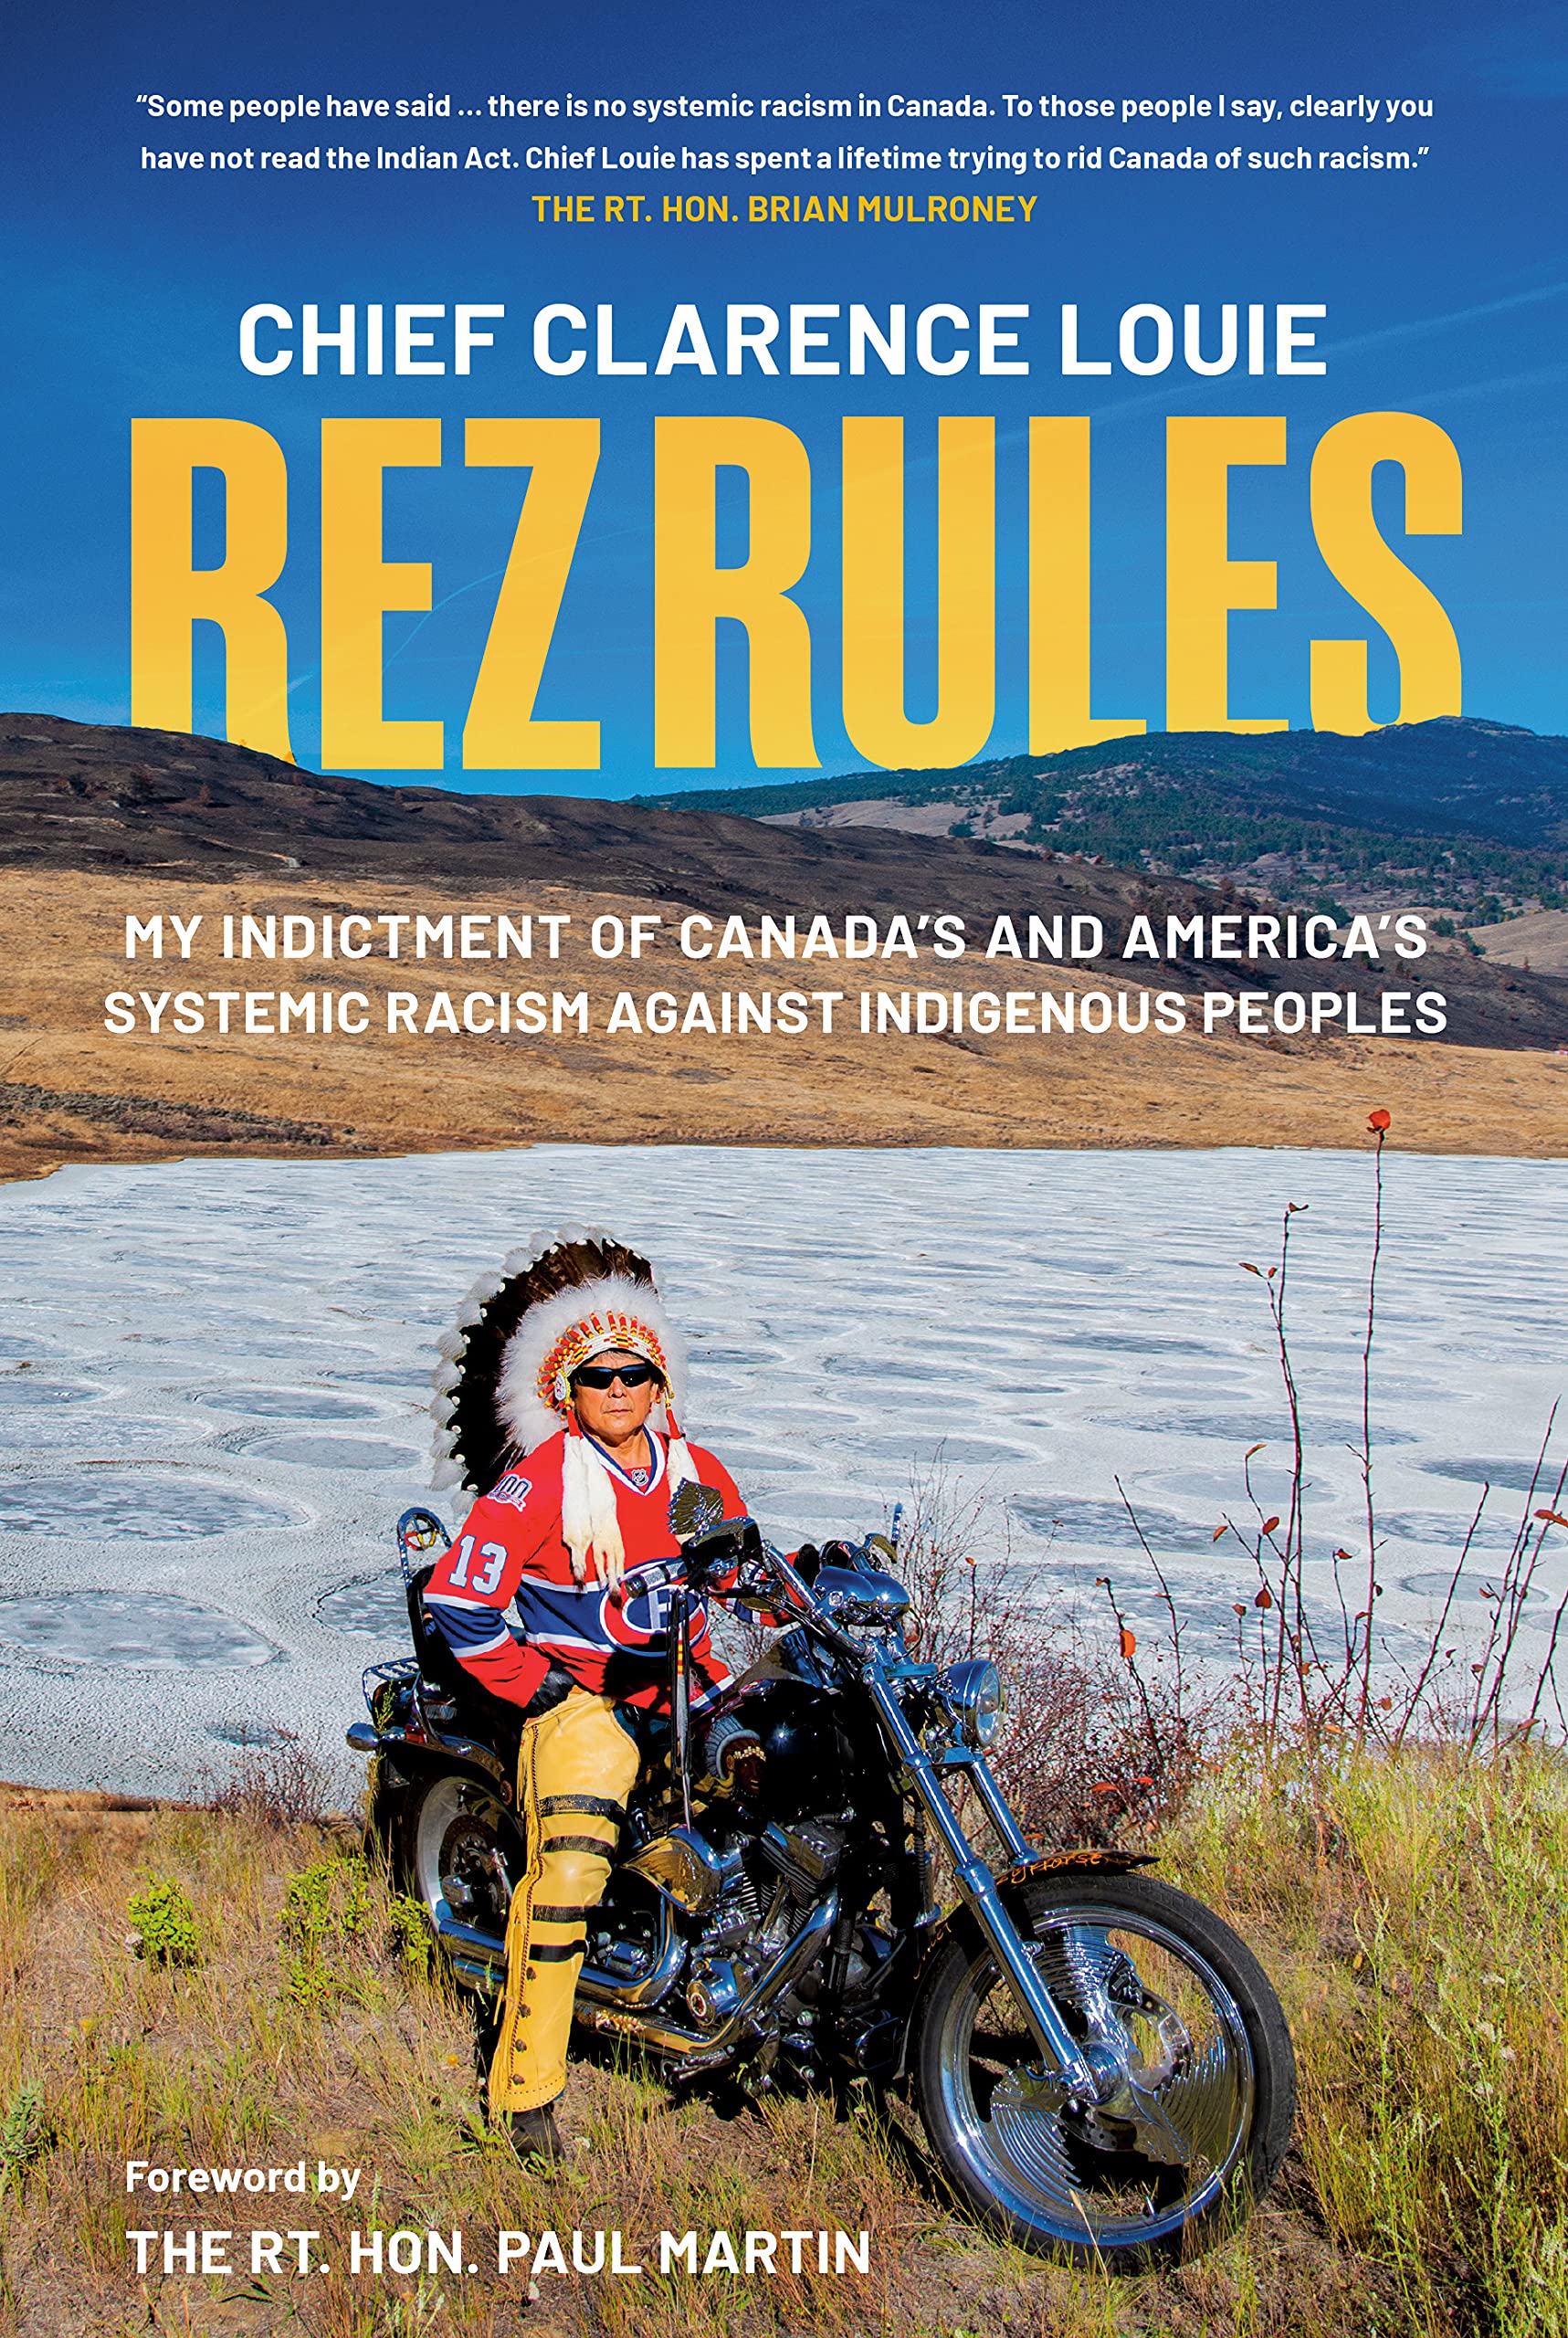 Rez Rules: My Indictment of Canada's and America's Systemic Racism Against Indigenous Peoples Hardcover by Chief Clarence Louie